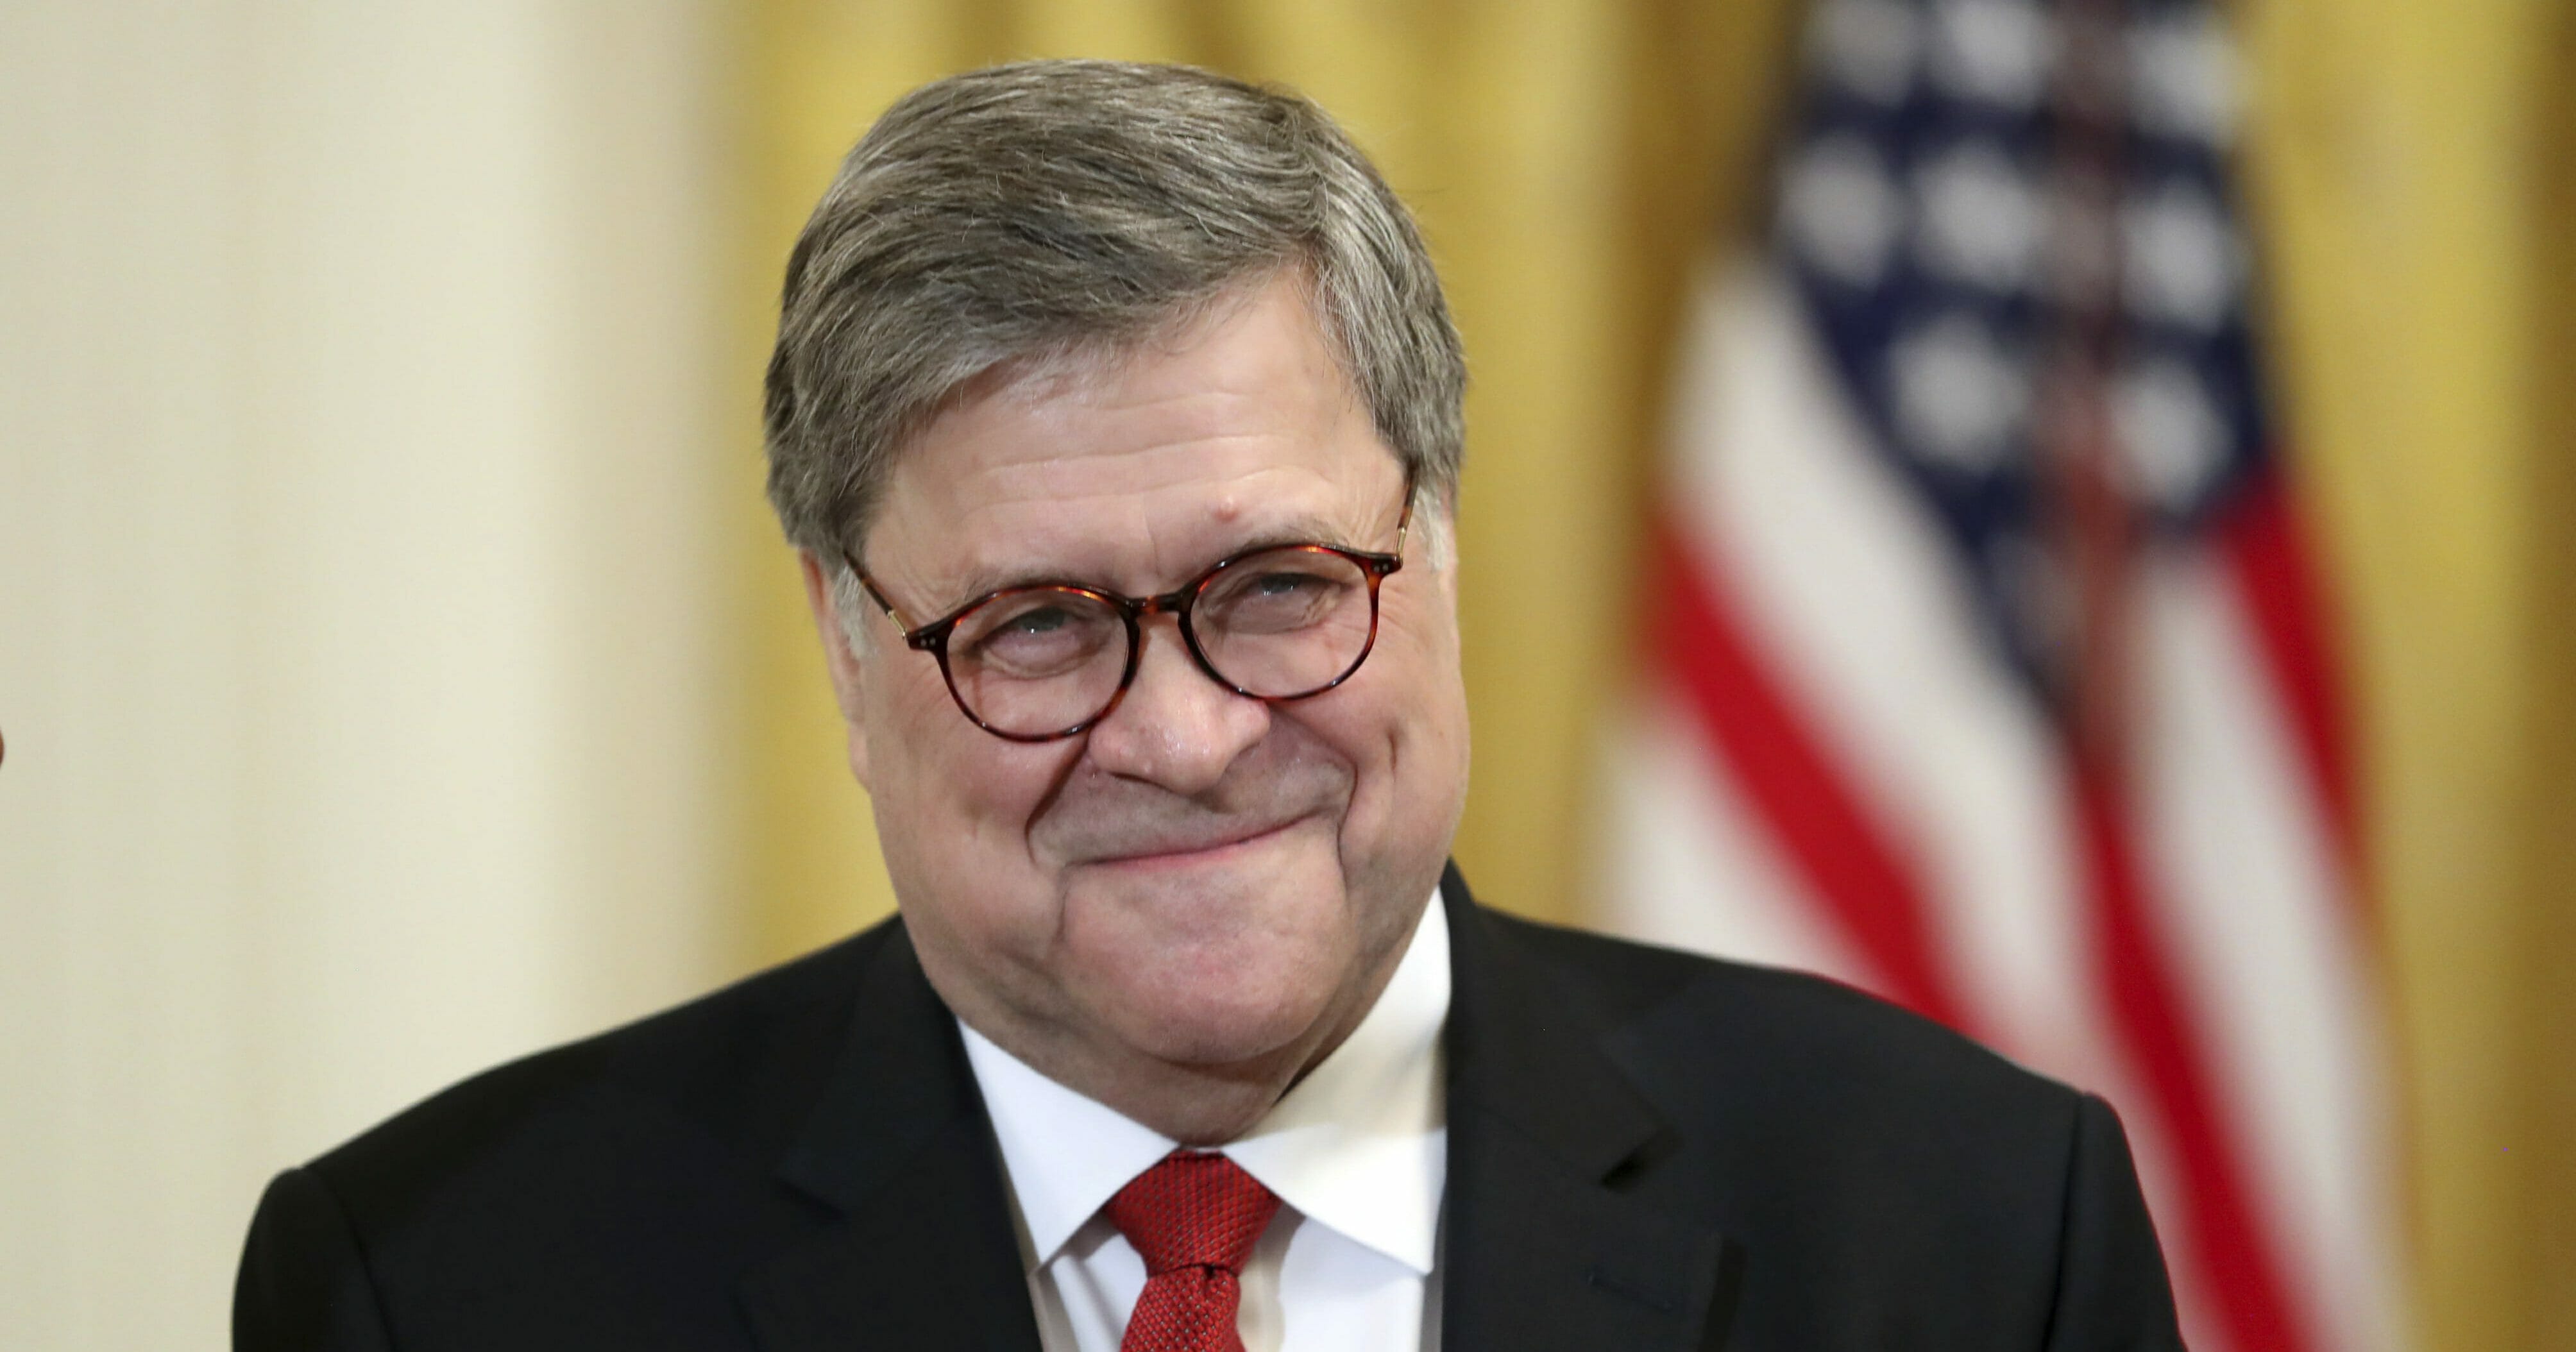 Attorney General William Barr smiles as he waits for President Donald Trump to speak at the 2019 Prison Reform Summit and First Step Act Celebration in the East Room of the White House in Washington, Monday, April 1, 2019.